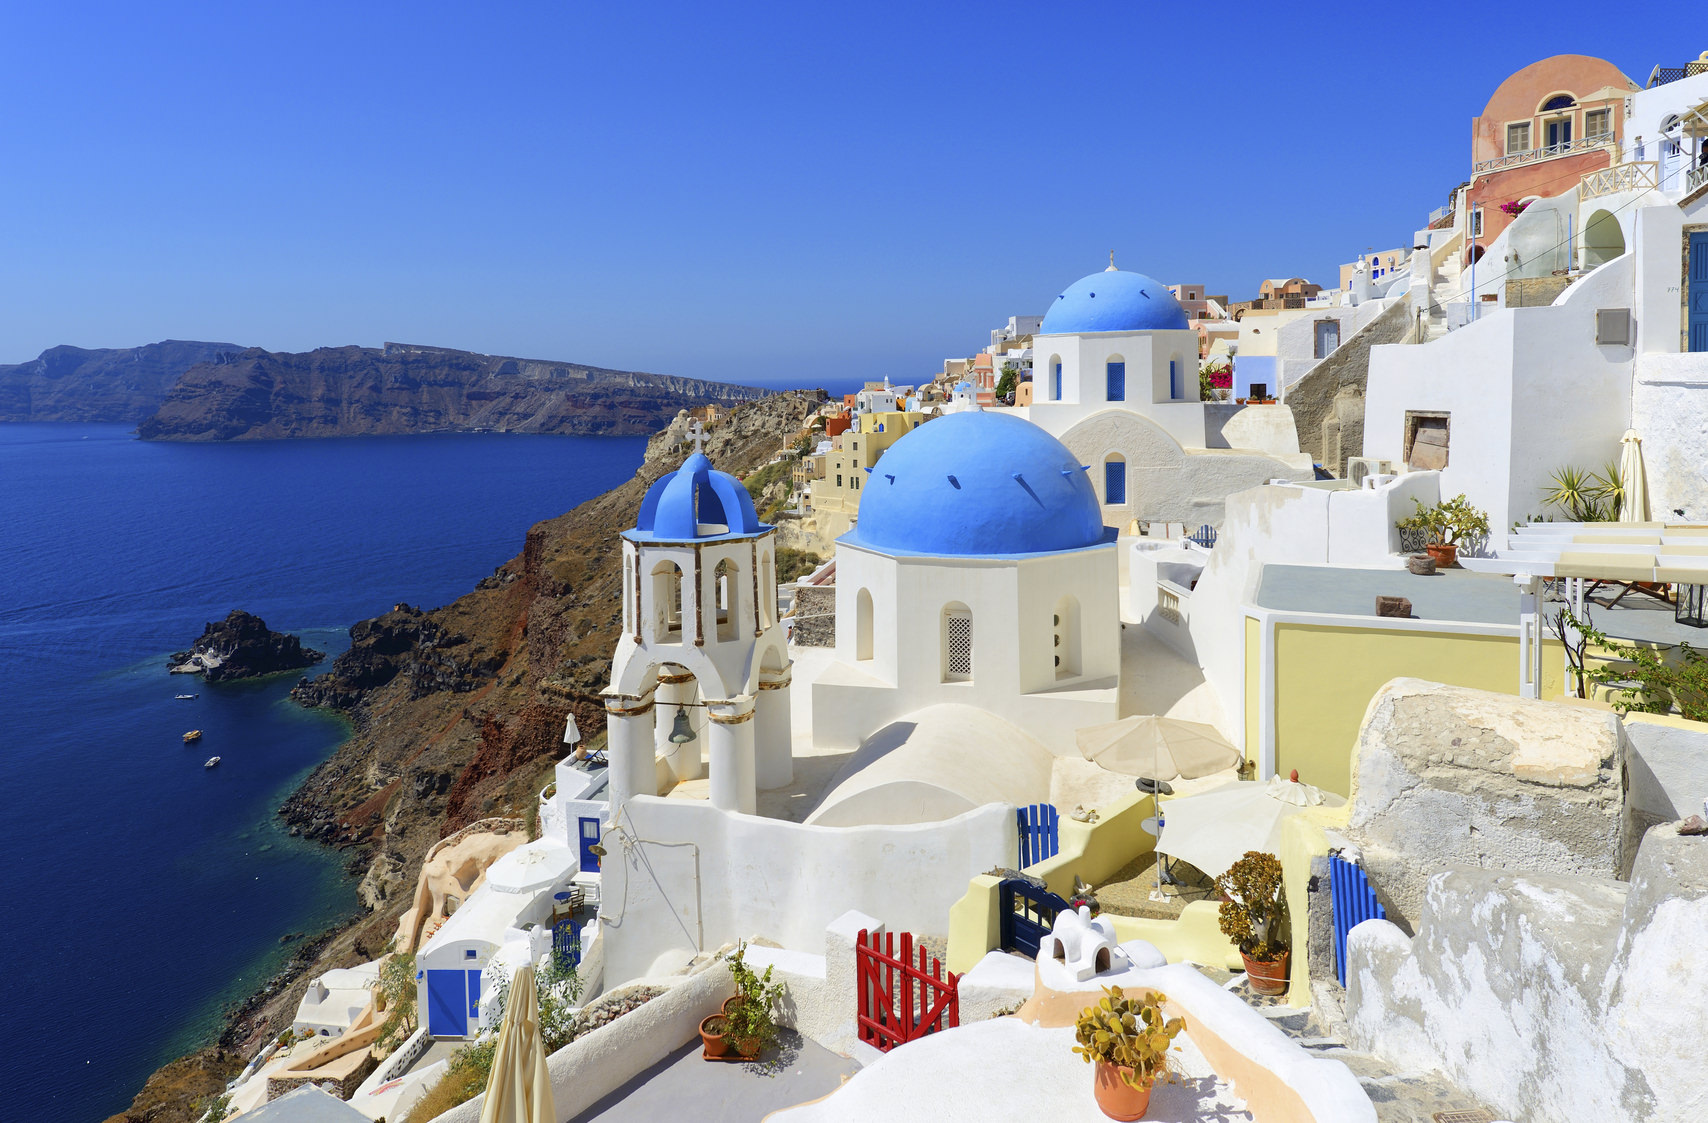  Oia, Santorini beckons visitors with its breathtaking setting and distinctive architecture.